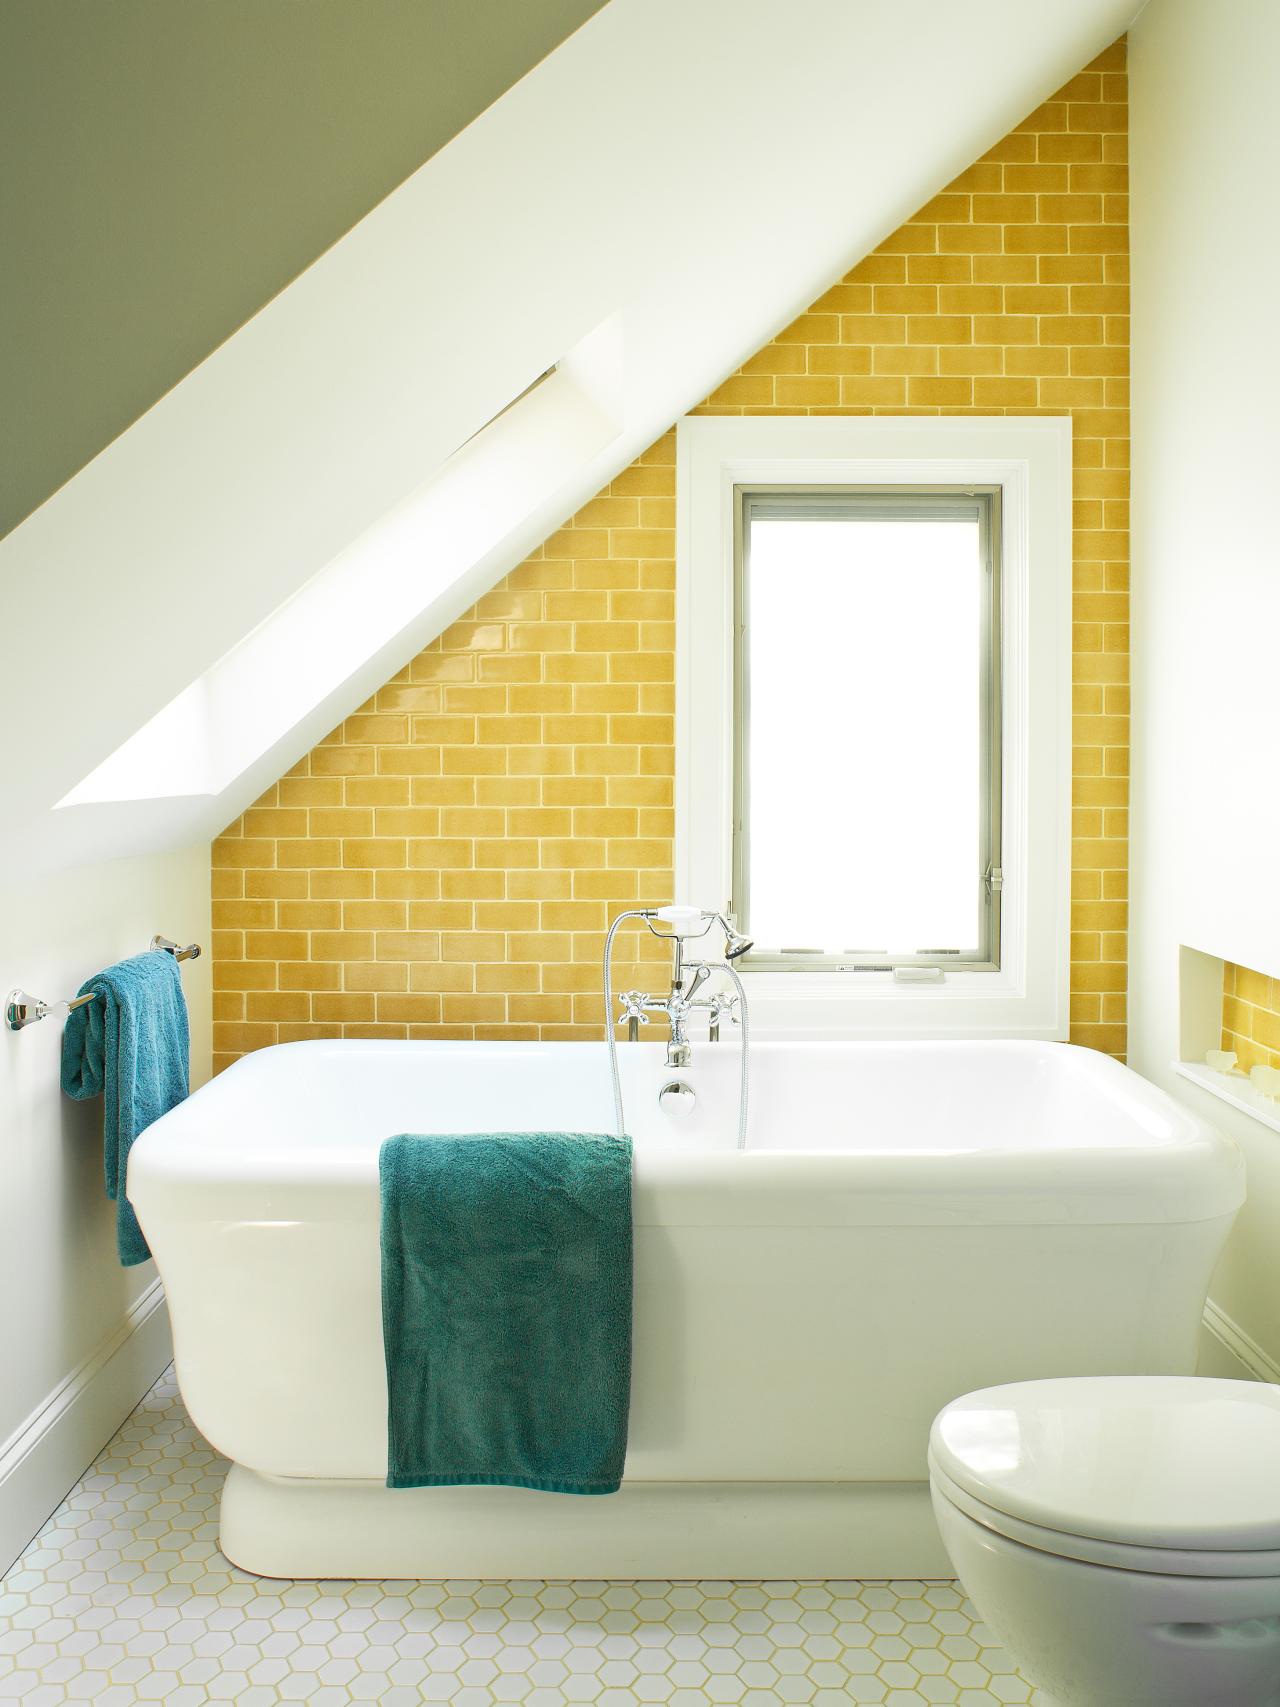 Bathroom Color and Paint Ideas: Pictures & Tips From HGTV ...
